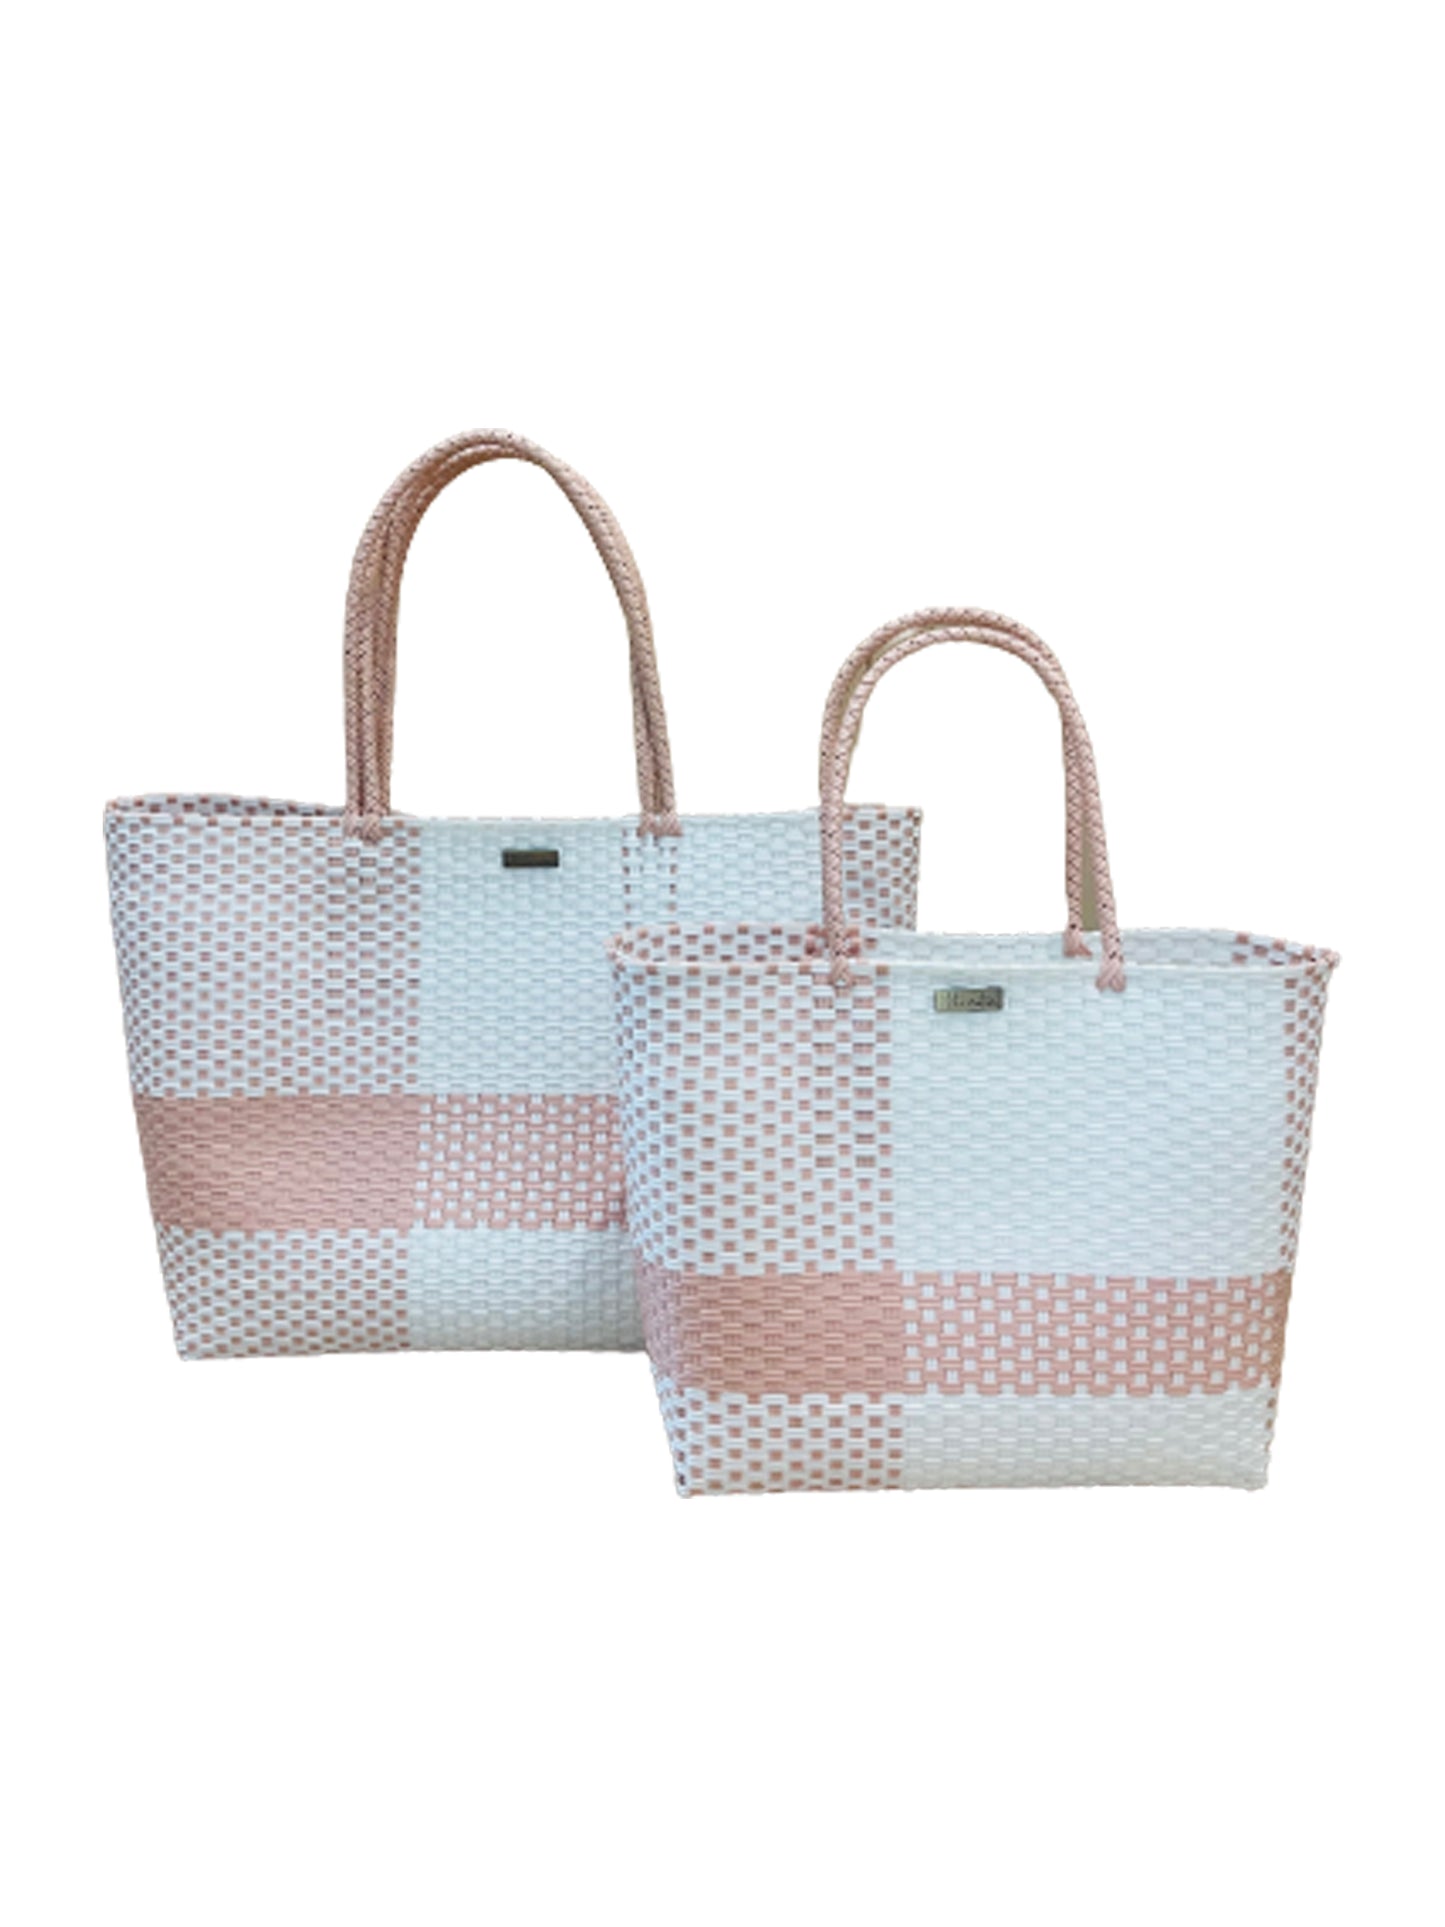 playa tote large and small pink and white